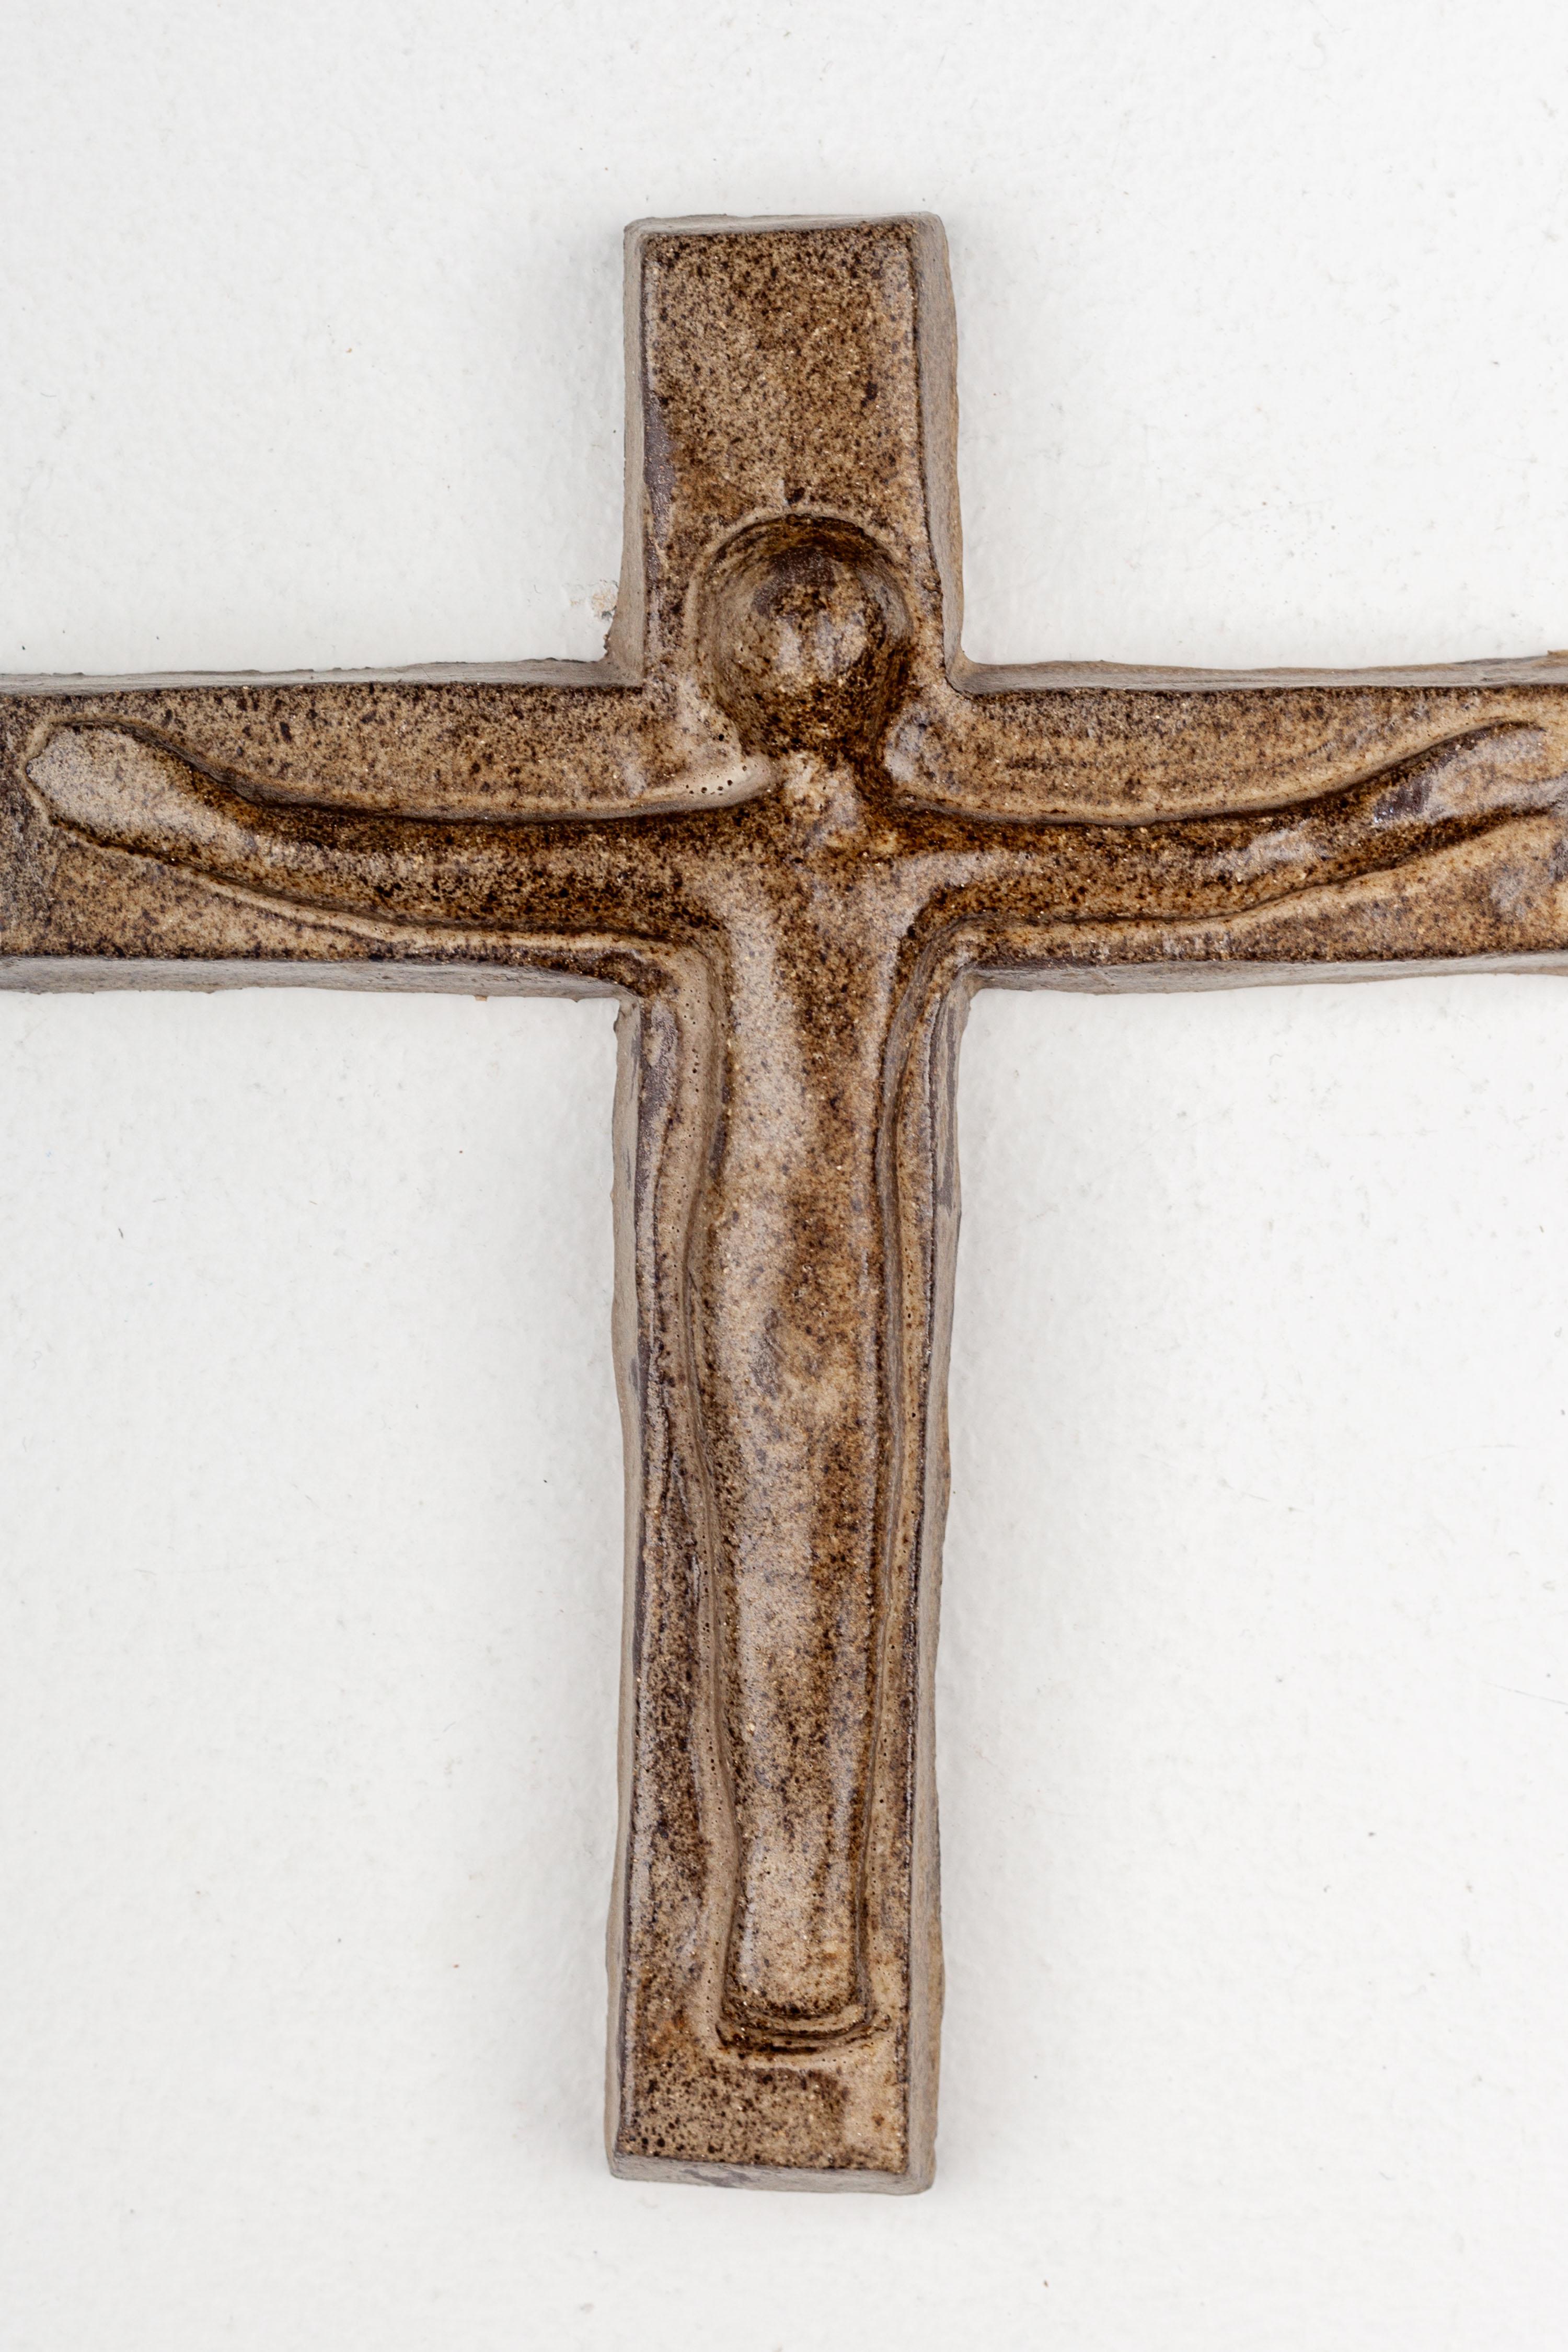 This midcentury ceramic wall cross, created in a European Pottery Studio, features an uncomplicated design. The Christ silhouette relief on the cross is hand-painted, showcasing a glossy point texture with earthy colors resembling granite. It